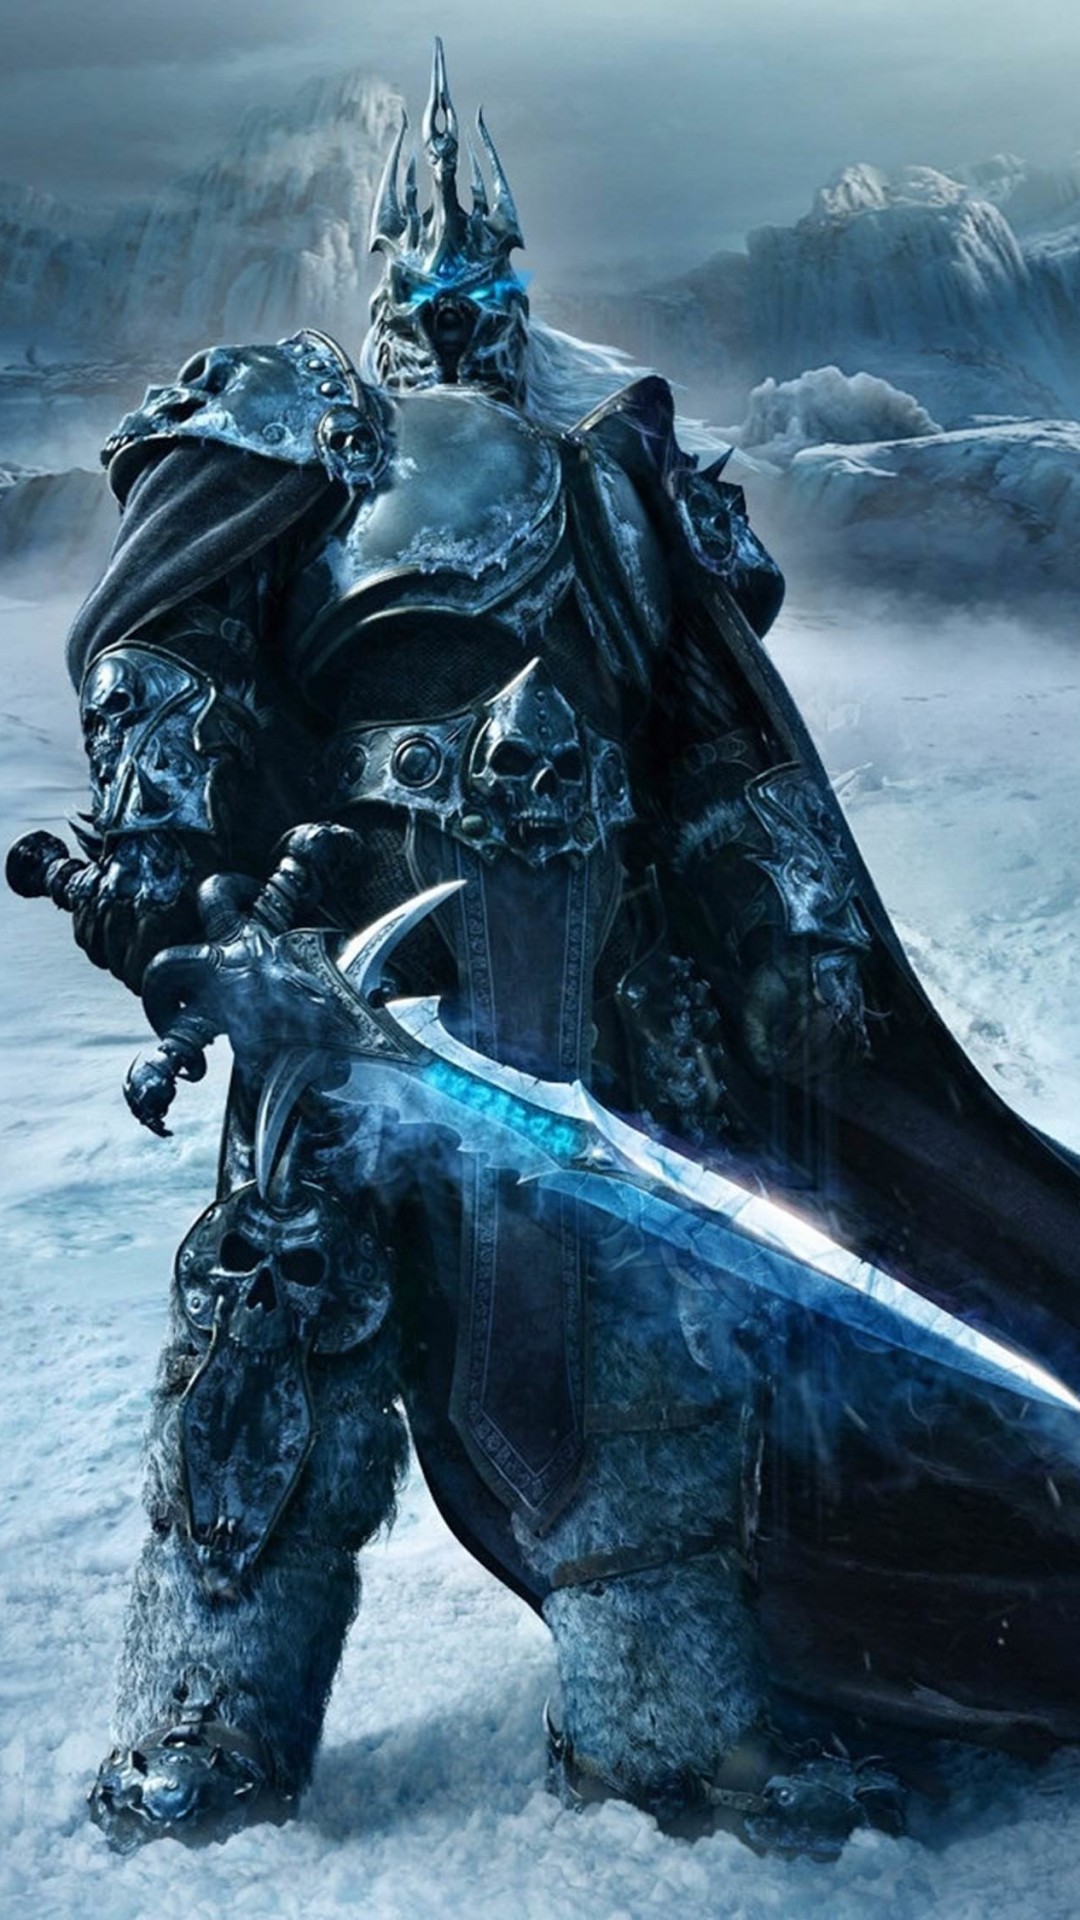 World of Warcraft: Wrath of the Lich King Wallpaper for SONY Xperia Z2